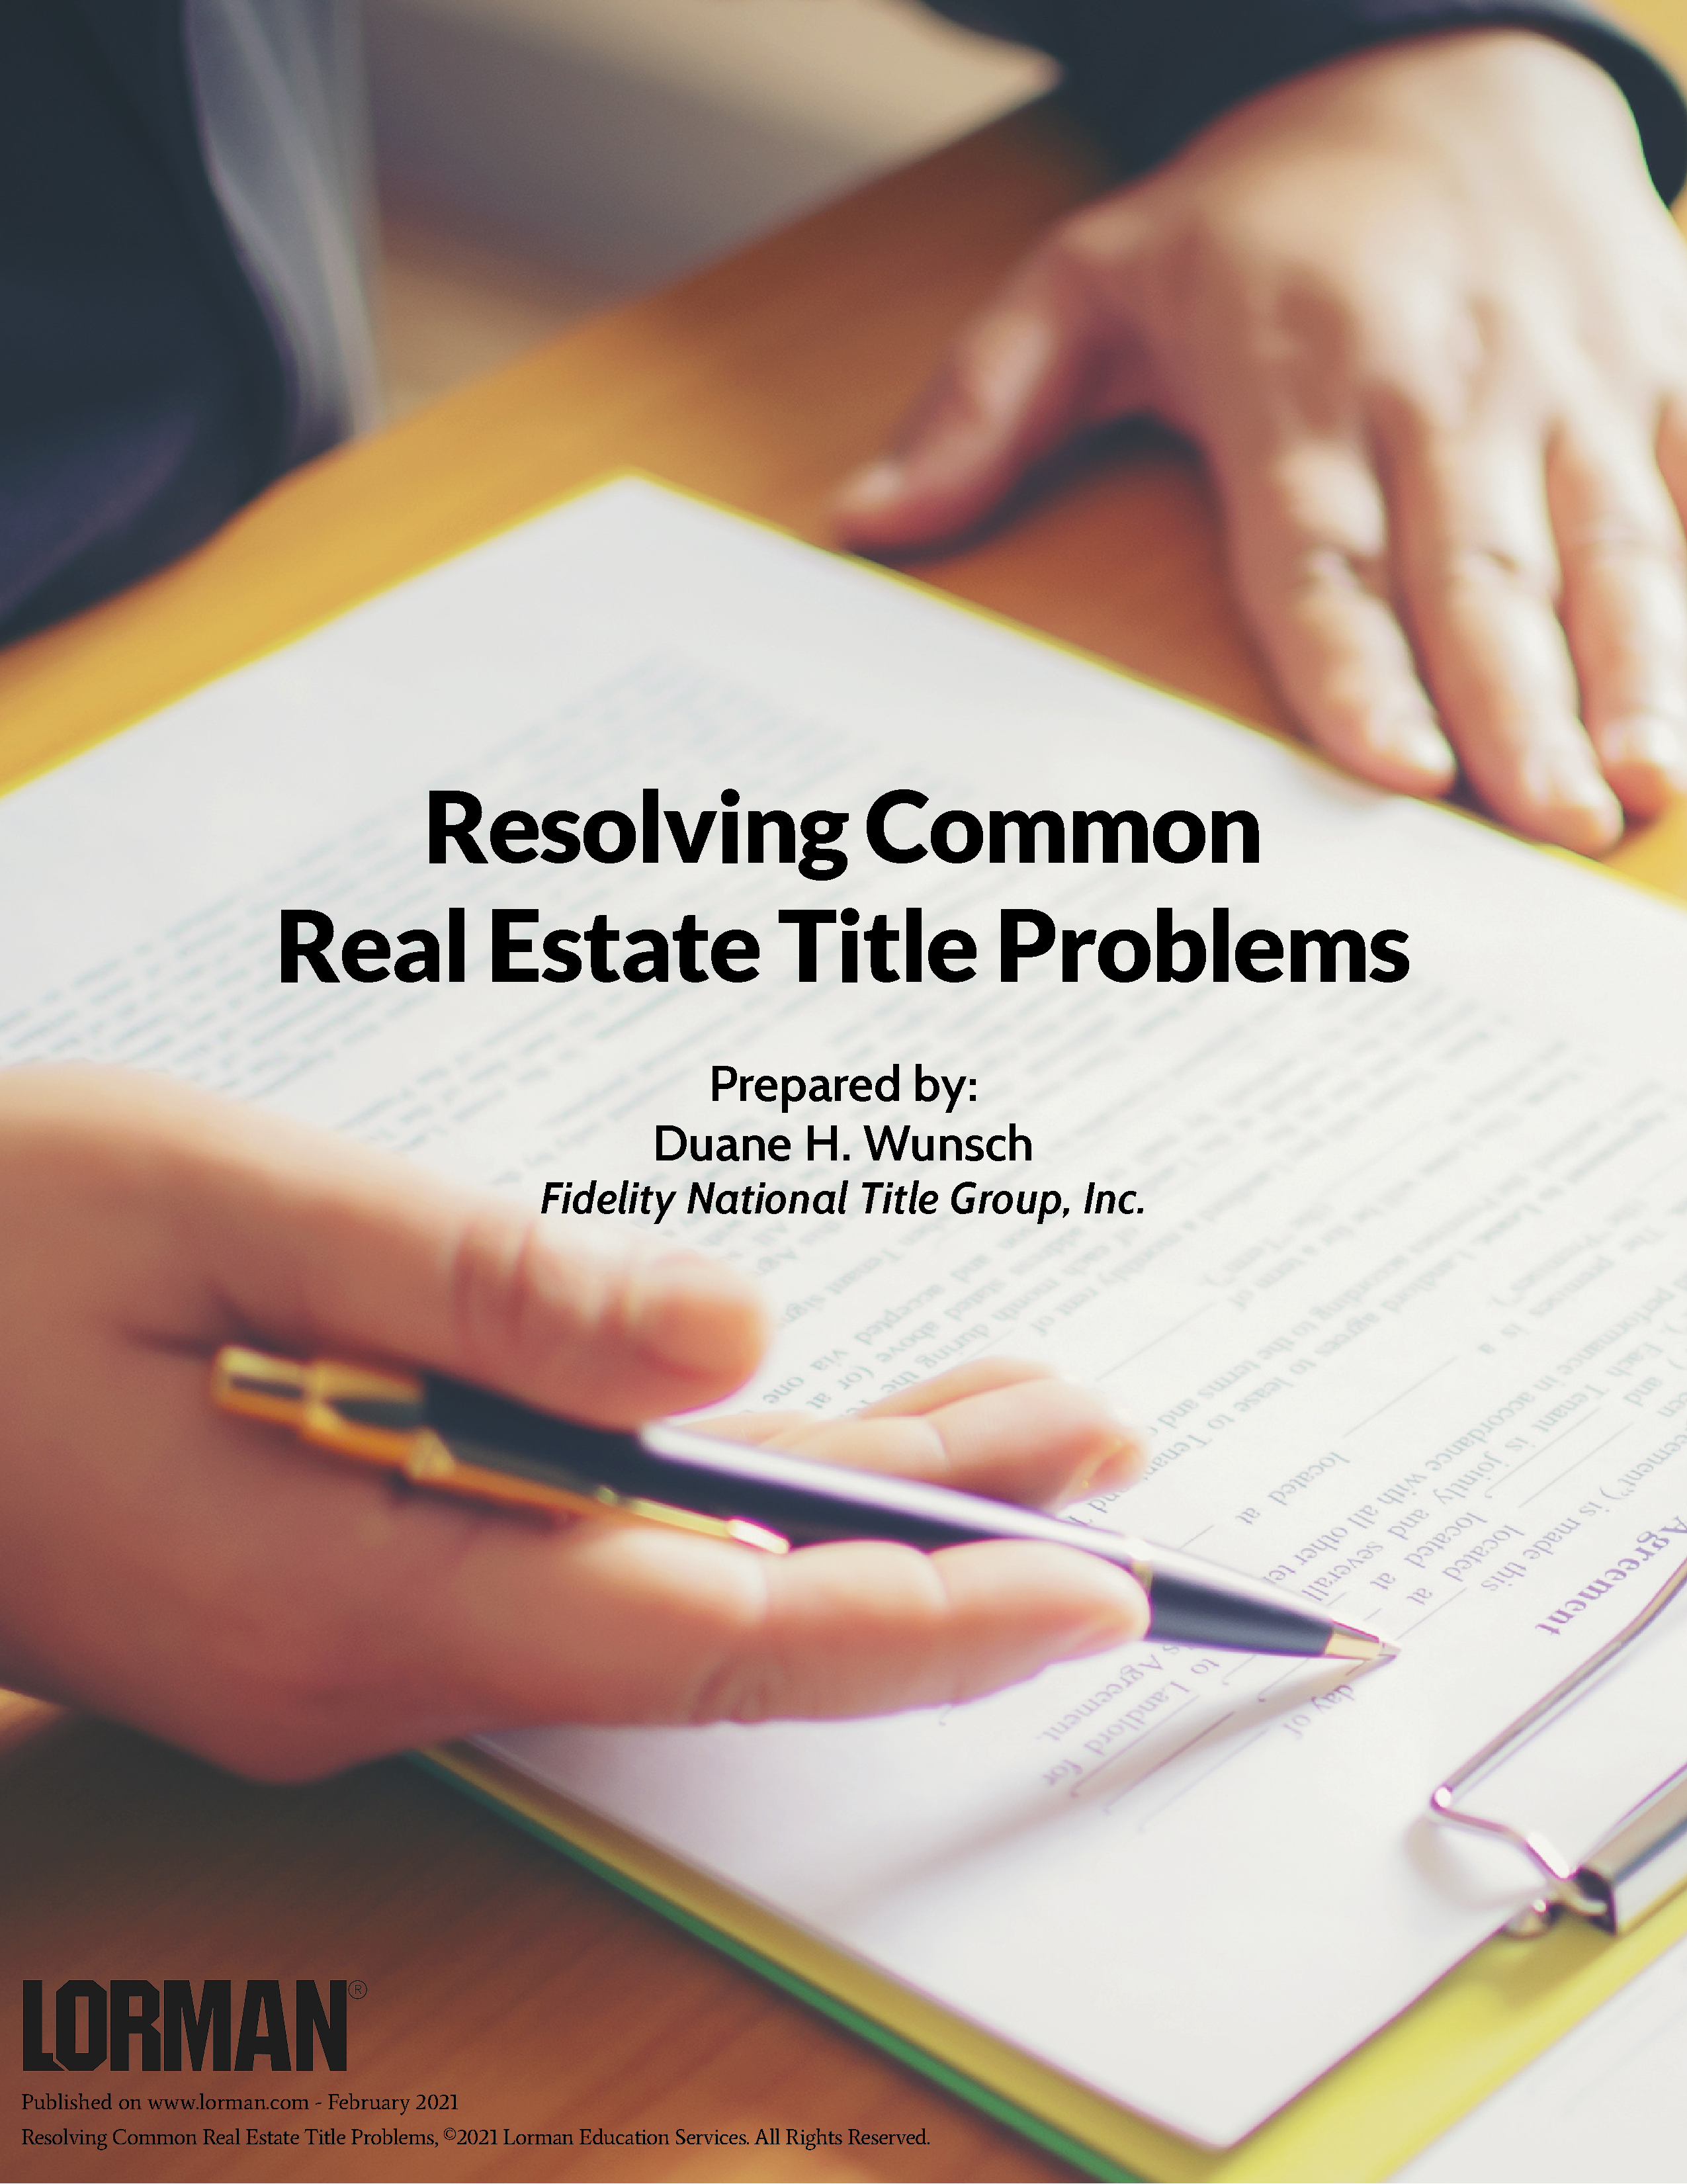 Resolving Common Real Estate Title Problems